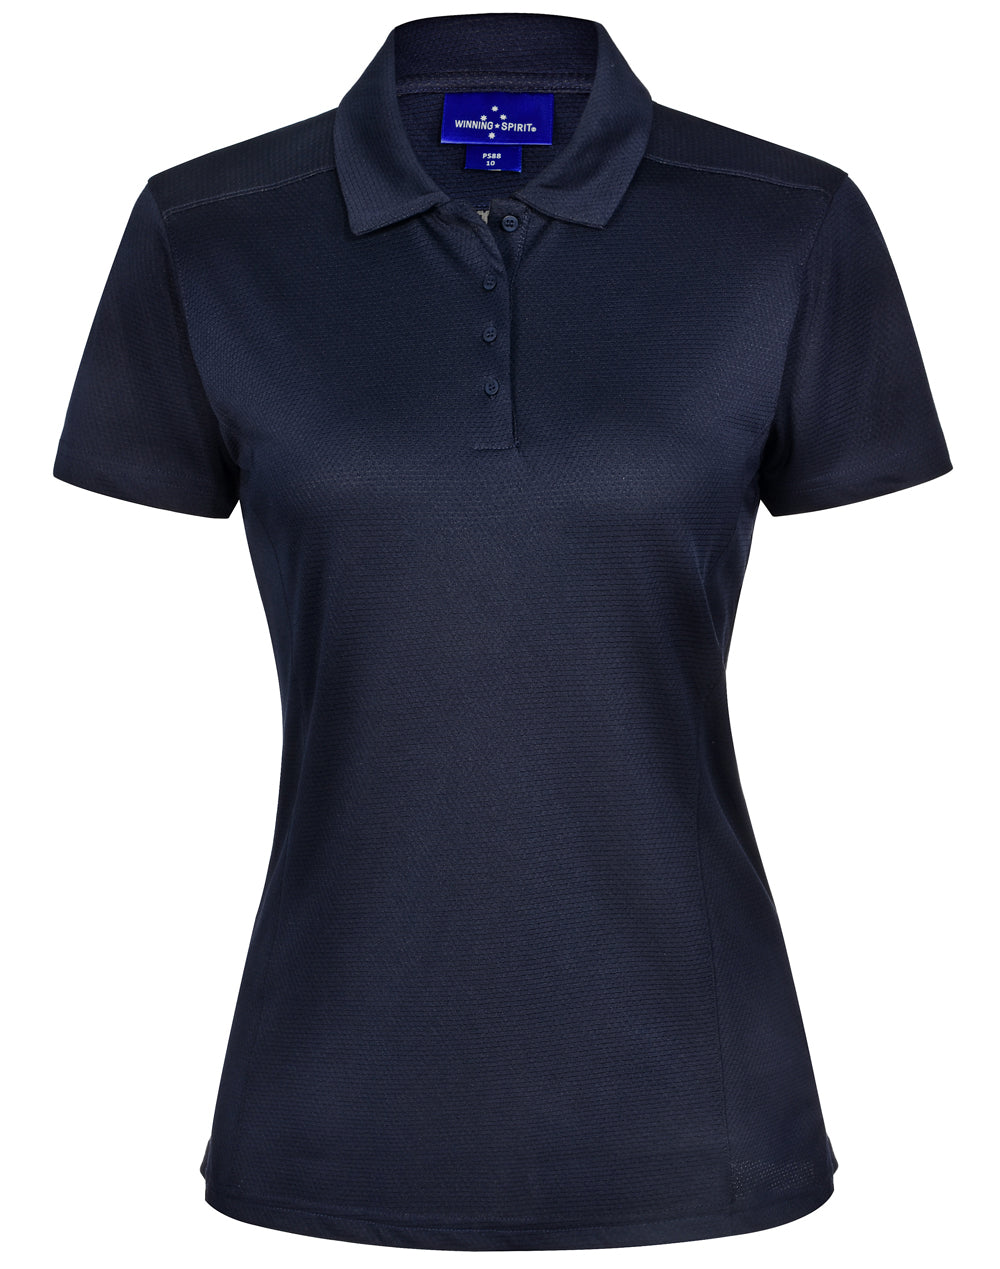 PS88 BAMBOO CHARCOAL CORPORATE S/S POLO - Ladies